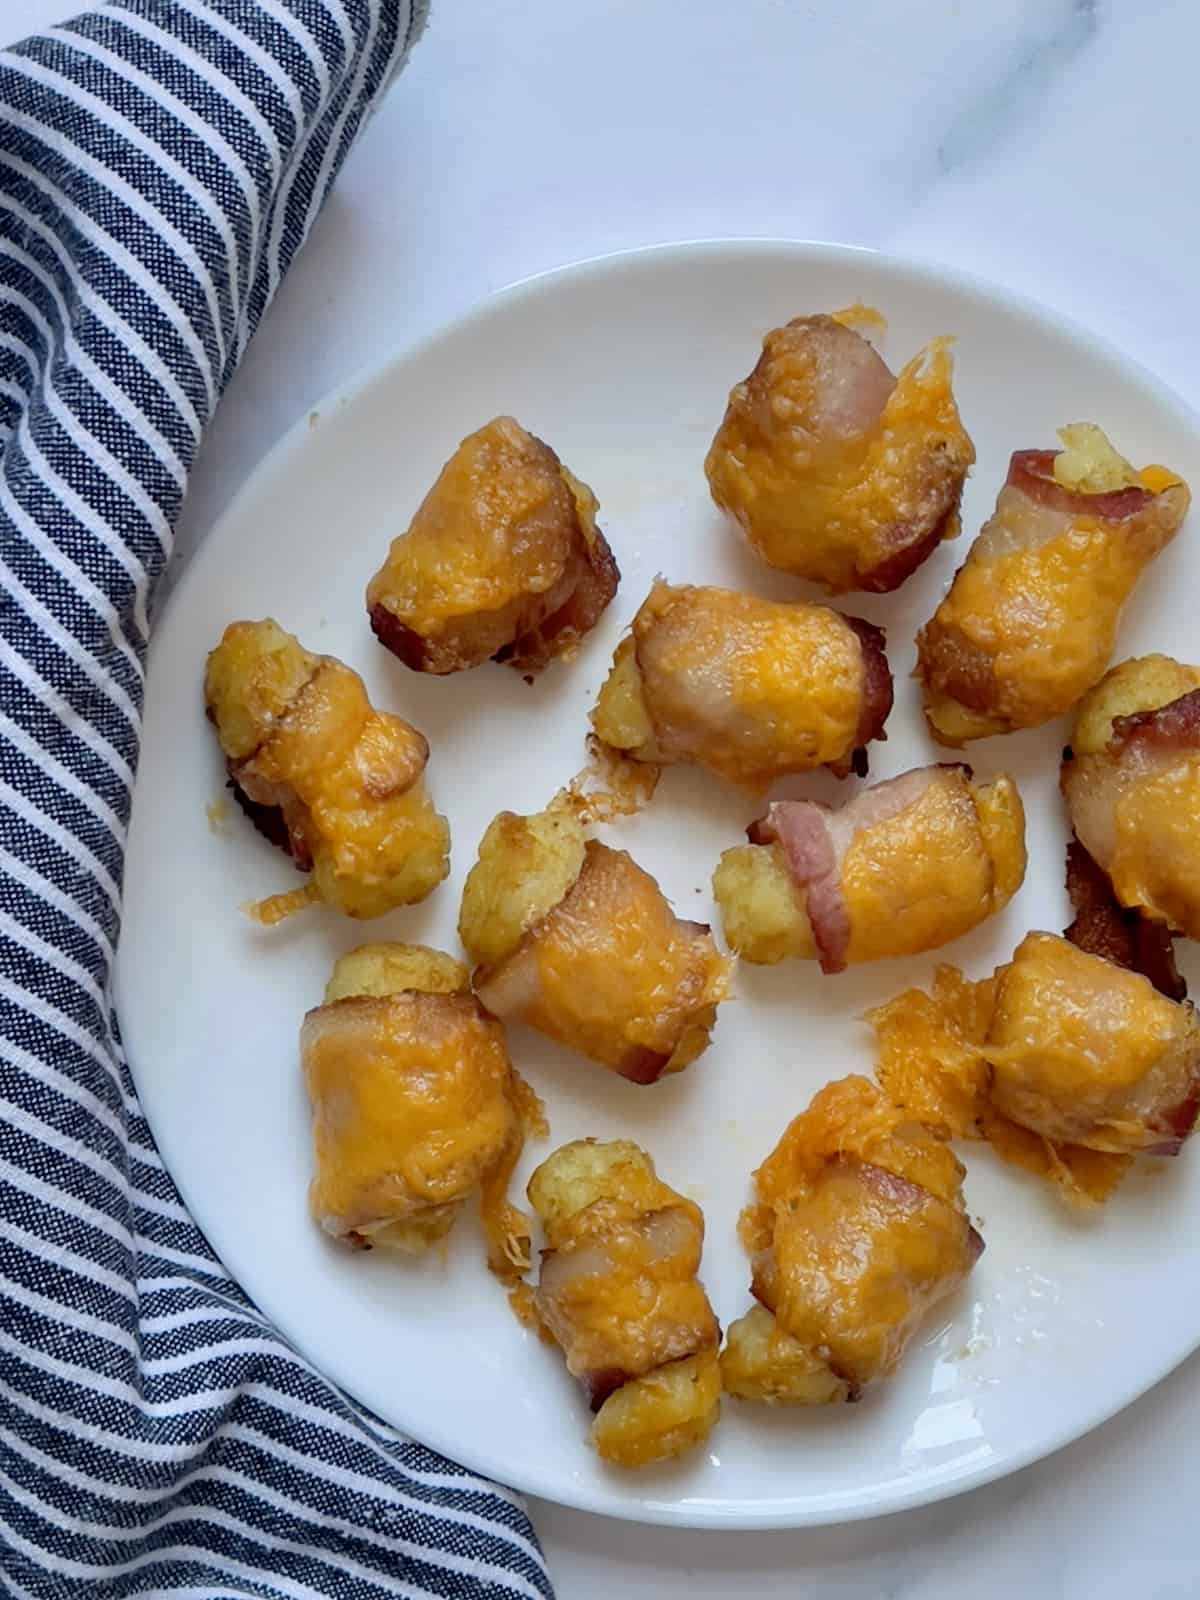 cheddar cheese topped on bacon wrapped tater tots